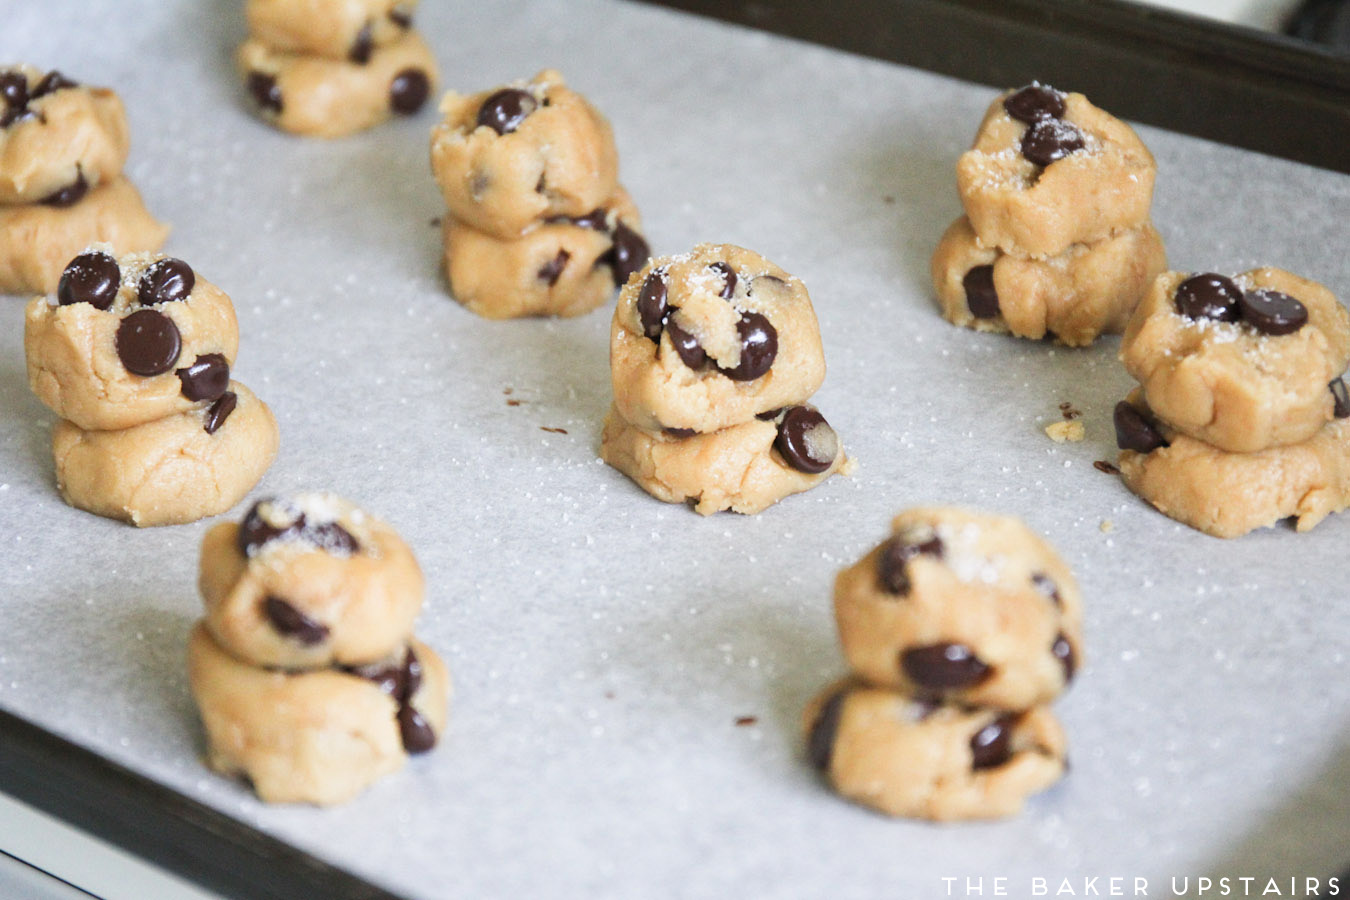 These millionaire chocolate chip cookies are so rich and indulgent, and over the top delicious!